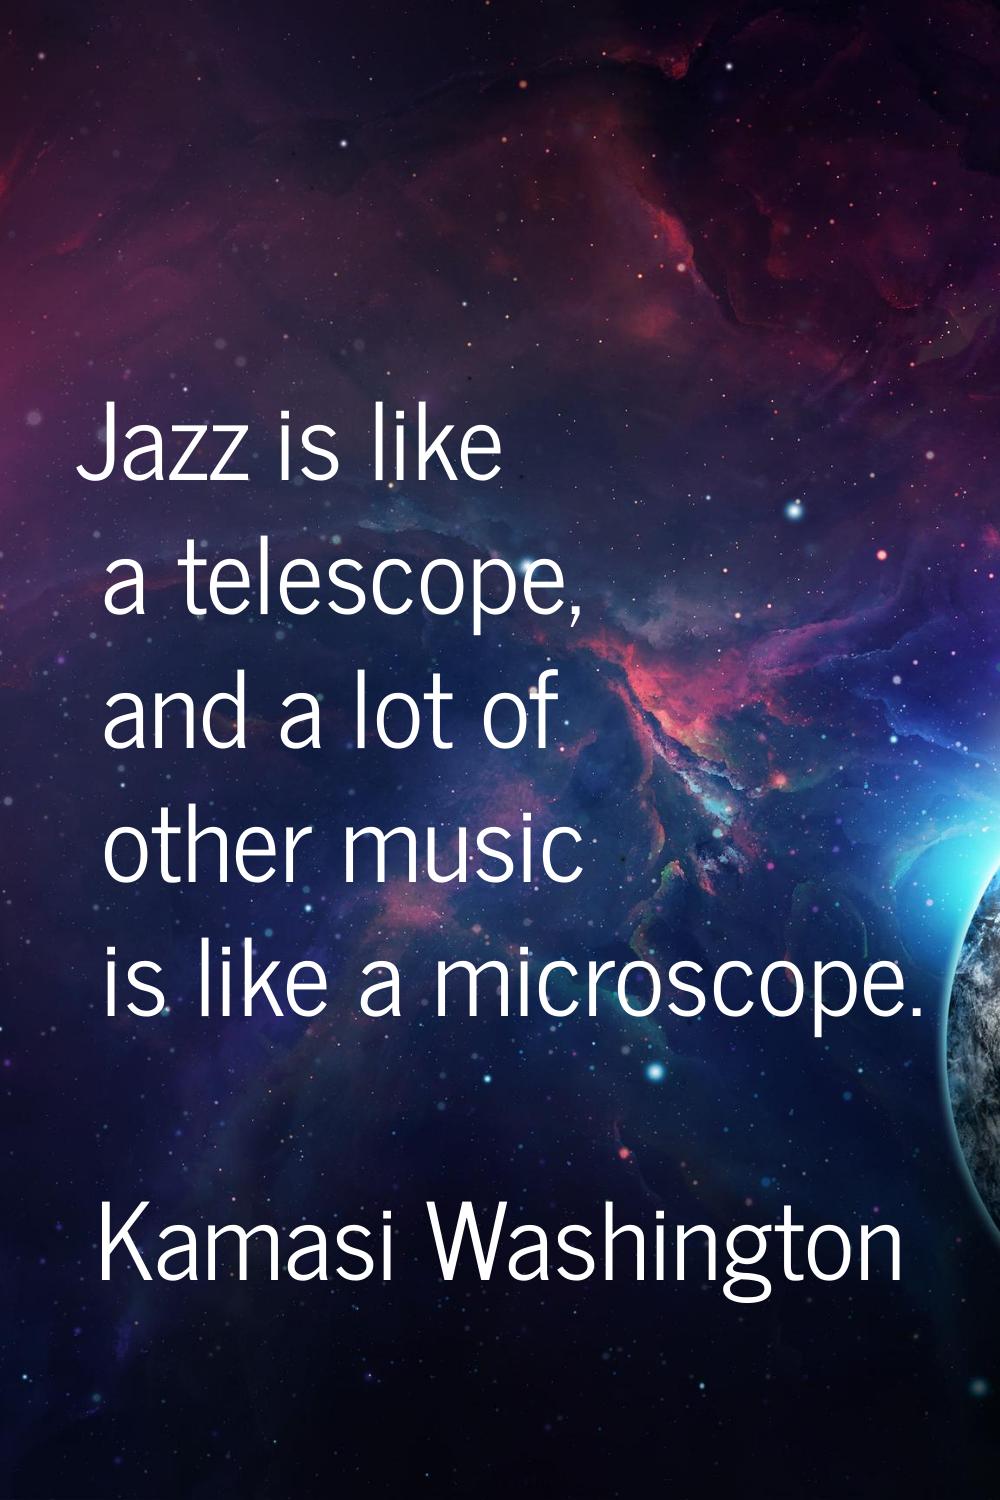 Jazz is like a telescope, and a lot of other music is like a microscope.